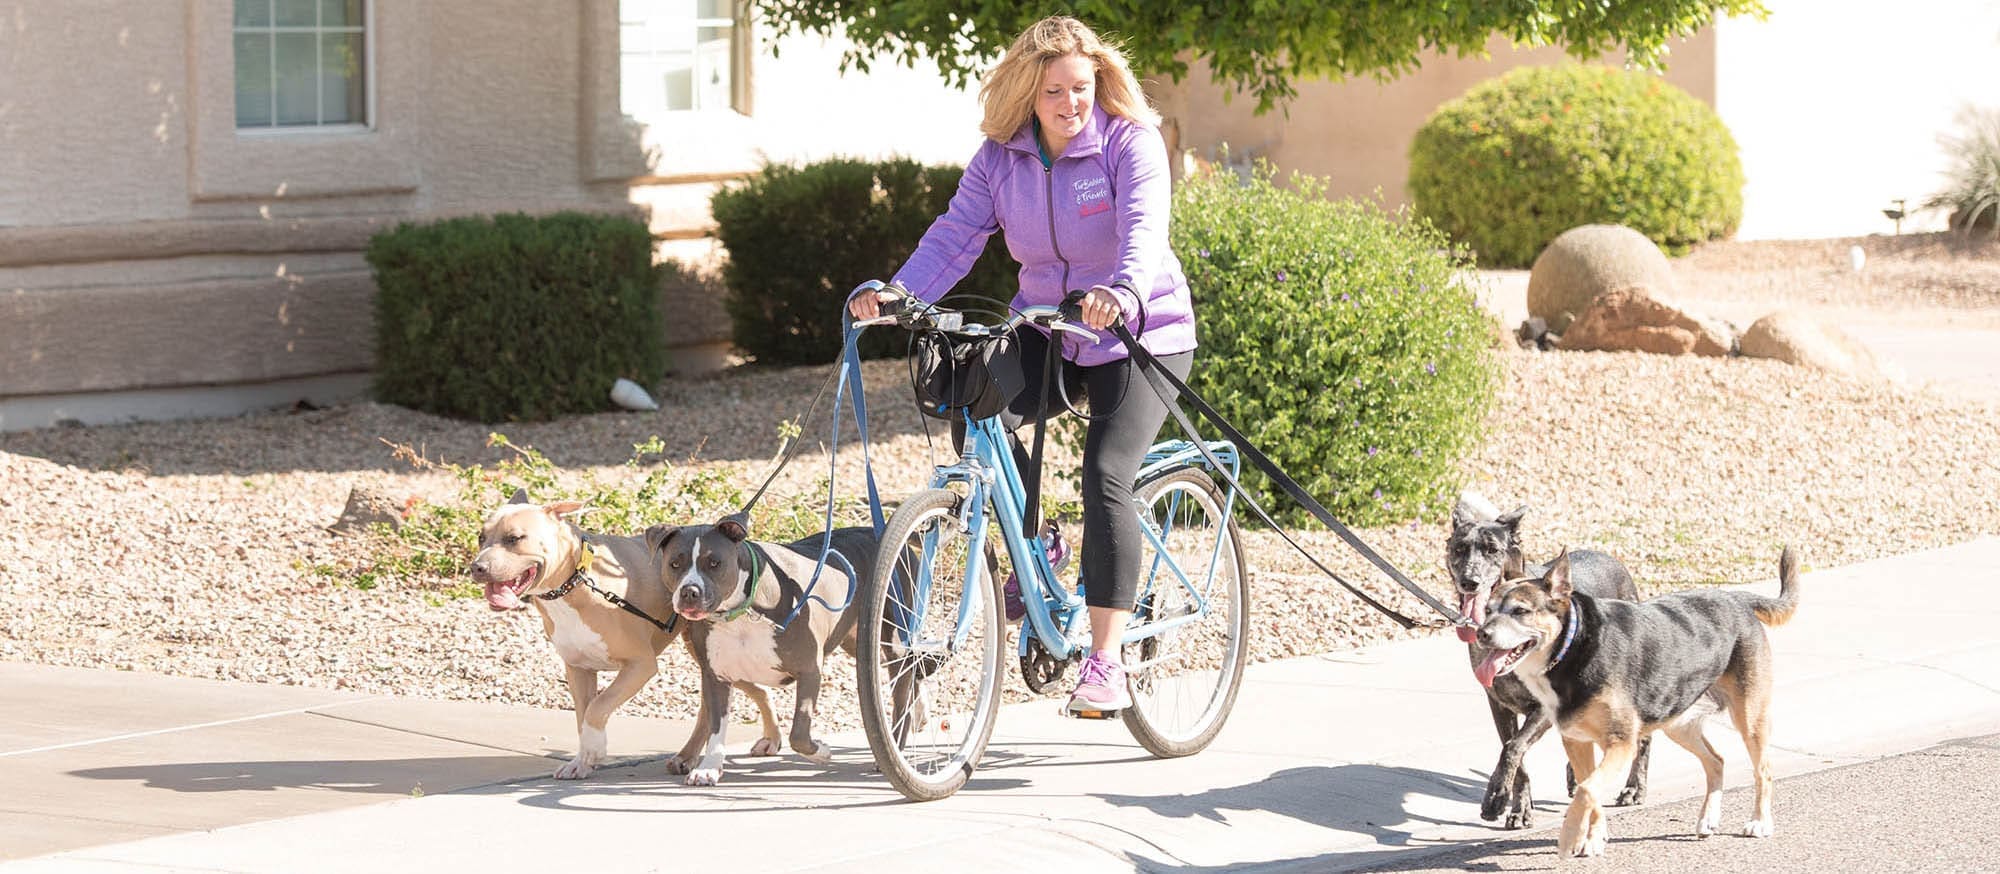 Professional dog walking service also offers bike runs for high energy dogs.